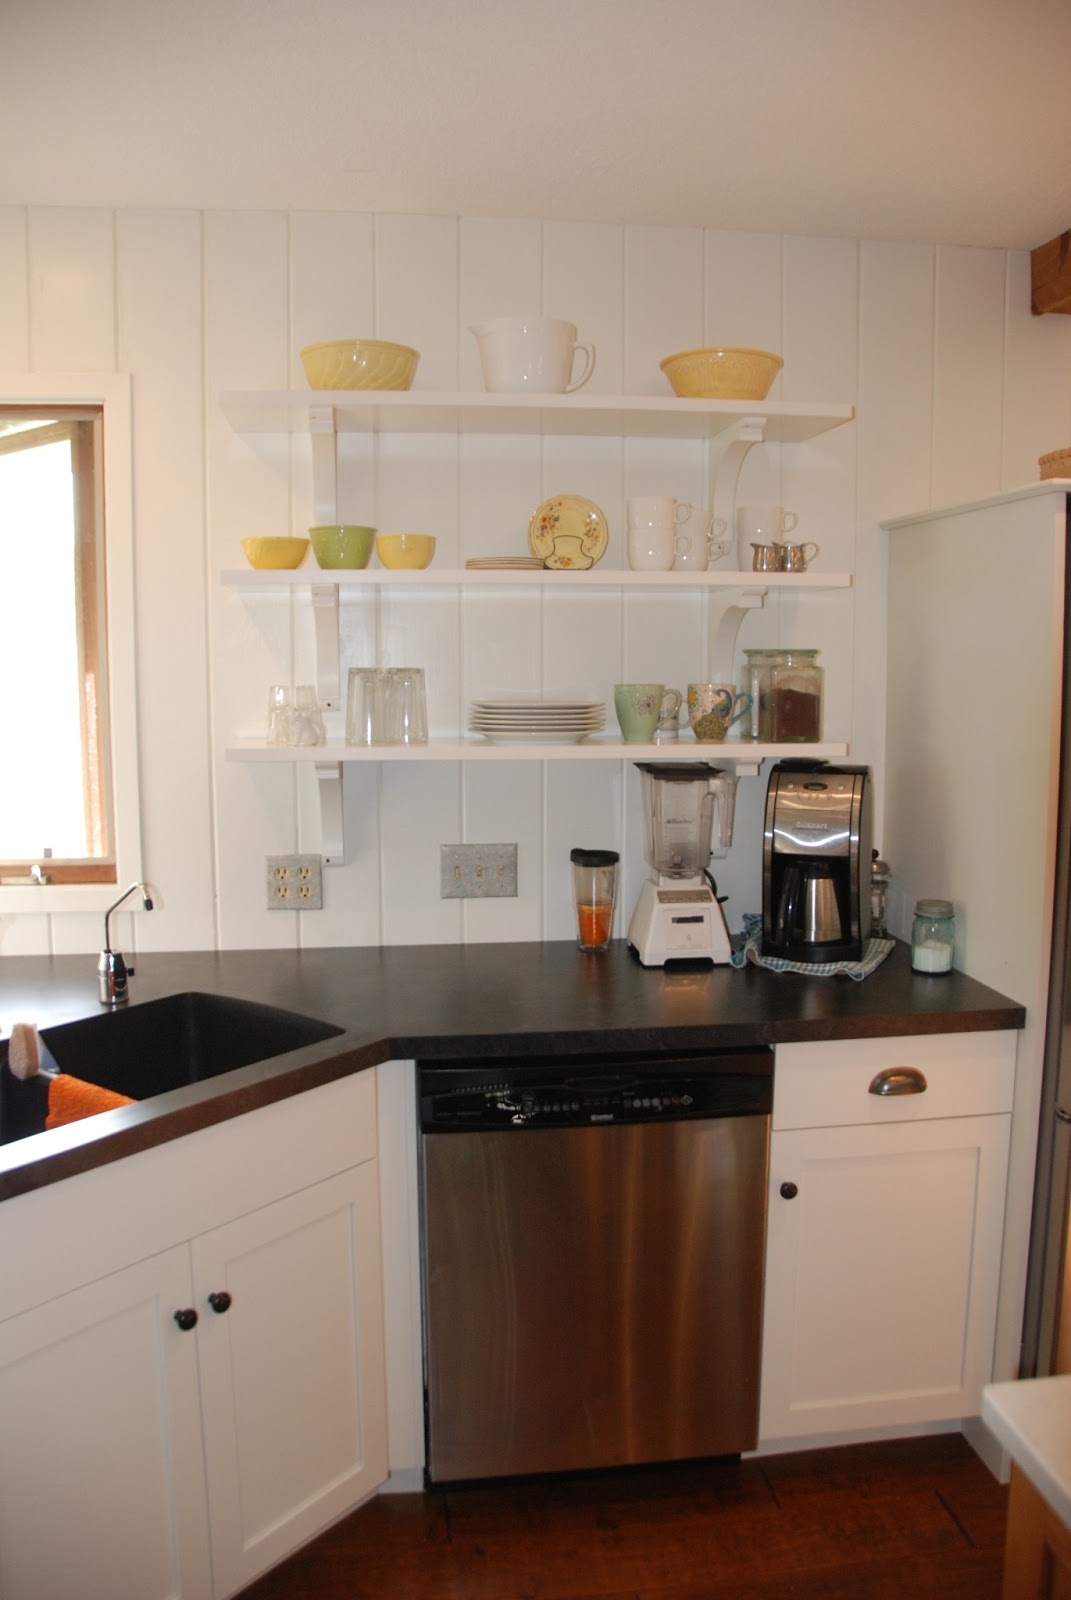 The Cottage: Kitchen Reveal